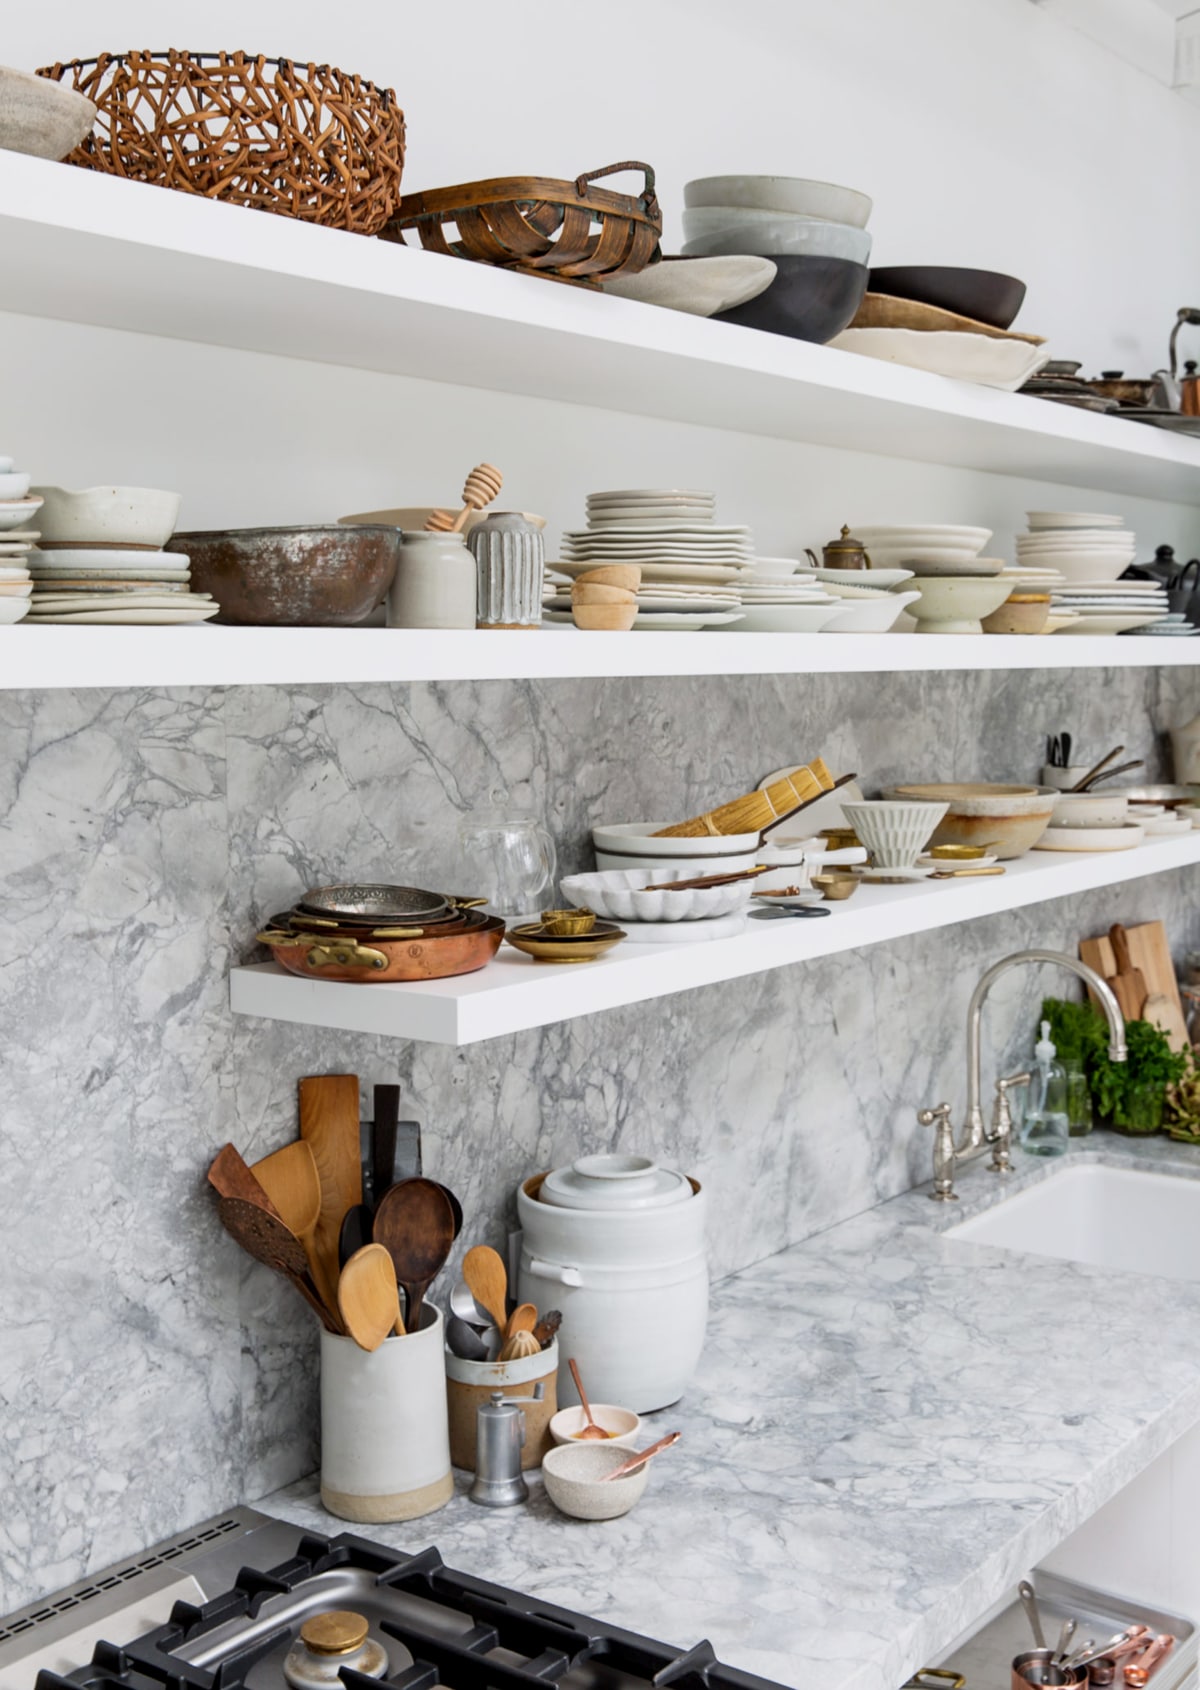 open shelving holds tons of food styling props | backyard photo studio kitchen tour on coco kelley